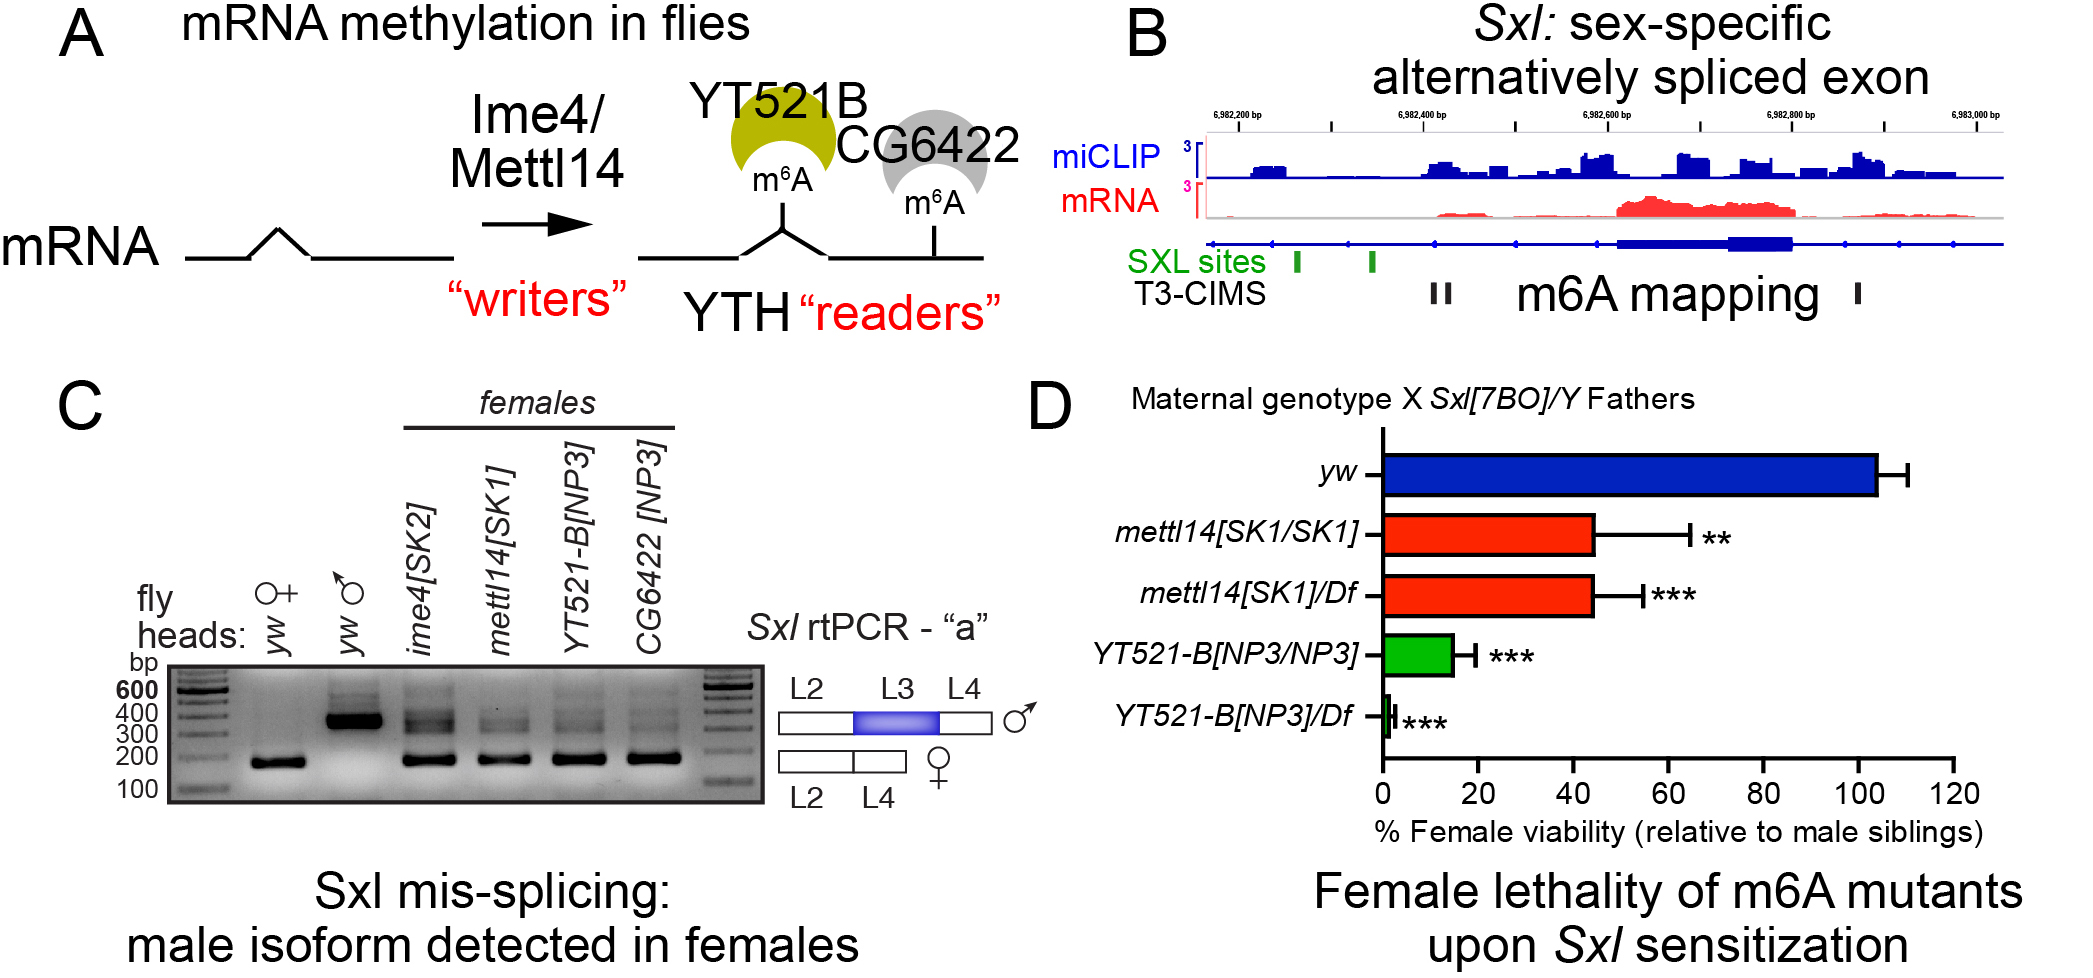 Figure 3. Drosophila m6A pathway. (A) m6A writers and readers. (B) Mapping of m6A modifications (miCLIP track) relative to mRNA-seq identifies extensive modification in the intronic regions (CIMS, nt-precision m6A sites) flanking the sex-specifically alternatively spliced exon of Sxl, the master female determinant. (C) rt-PCR tests reveal accumulation of the male isoform of Sxl in various m6A mutant females. (D) m6A mutant females exhibit lethality when made heterozygous for Sxl, indicating failure of the Sxl autoregulatory program. 